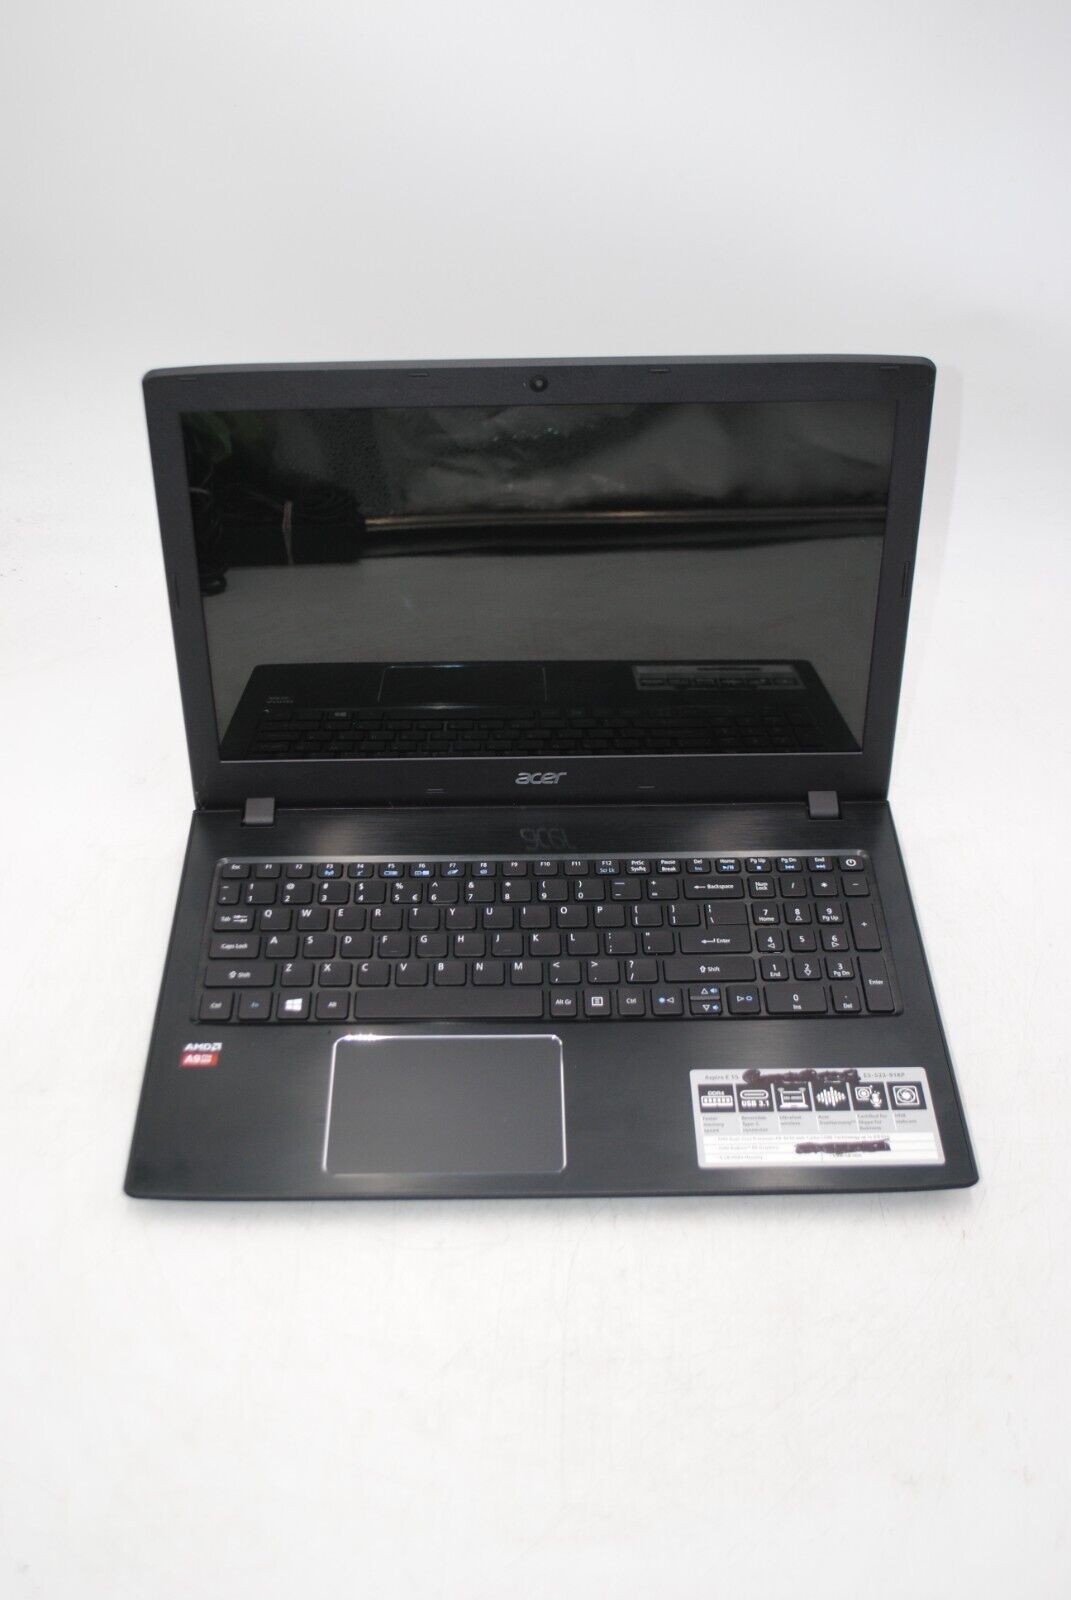 Primary image for ACER ASPIRE E5-523 | AMD A9-9410 RADEON R5/ 1TB HDD 8GB RAM WIN10